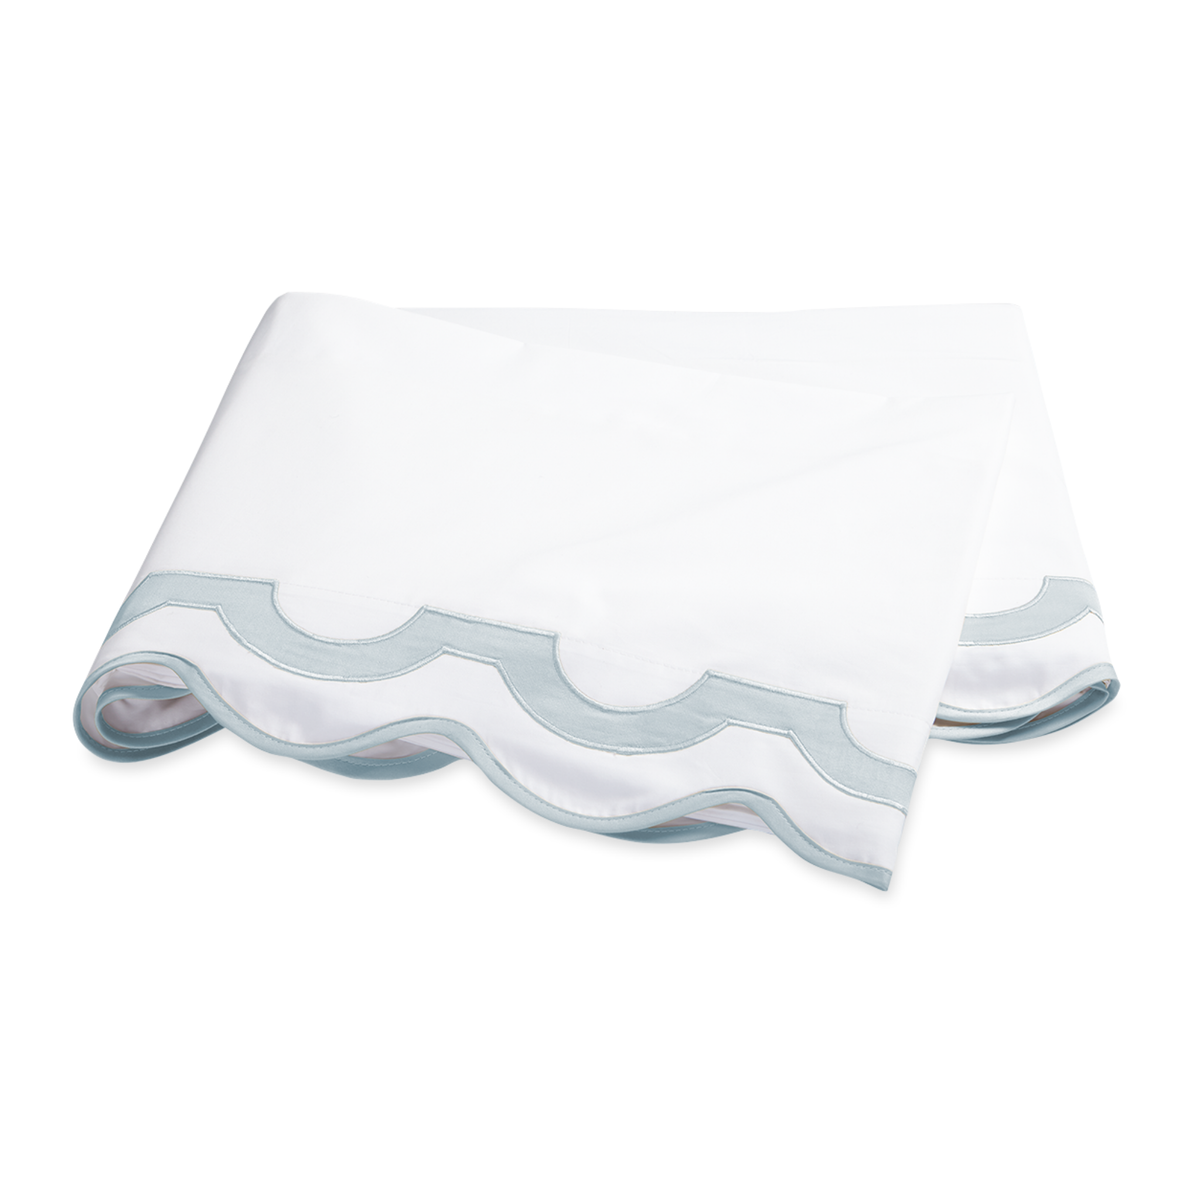 Folded Flat Sheet of Matouk Mirasol Collection in Pool Color